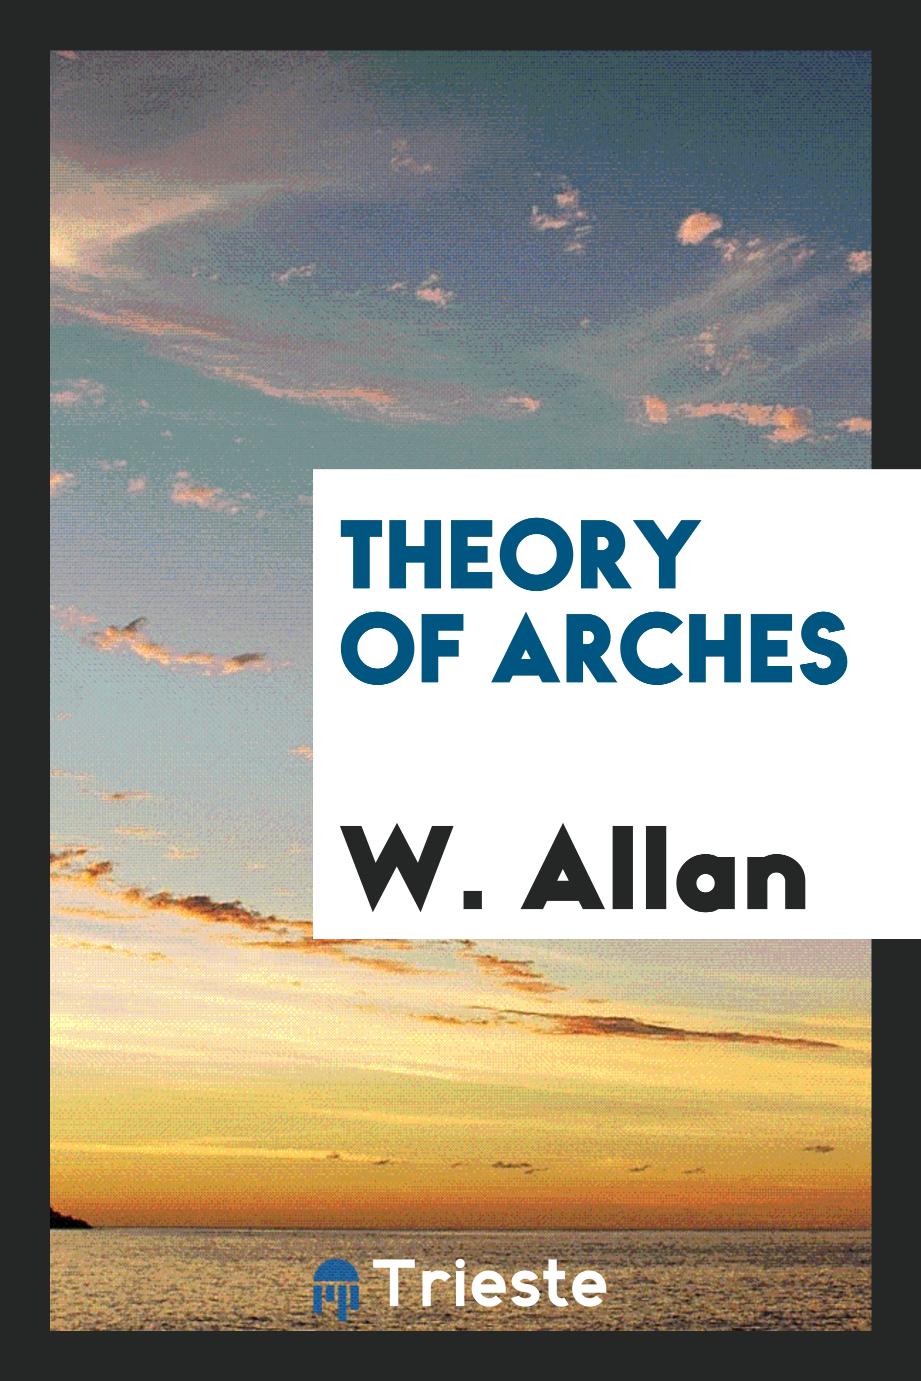 W. Allan - Theory of Arches